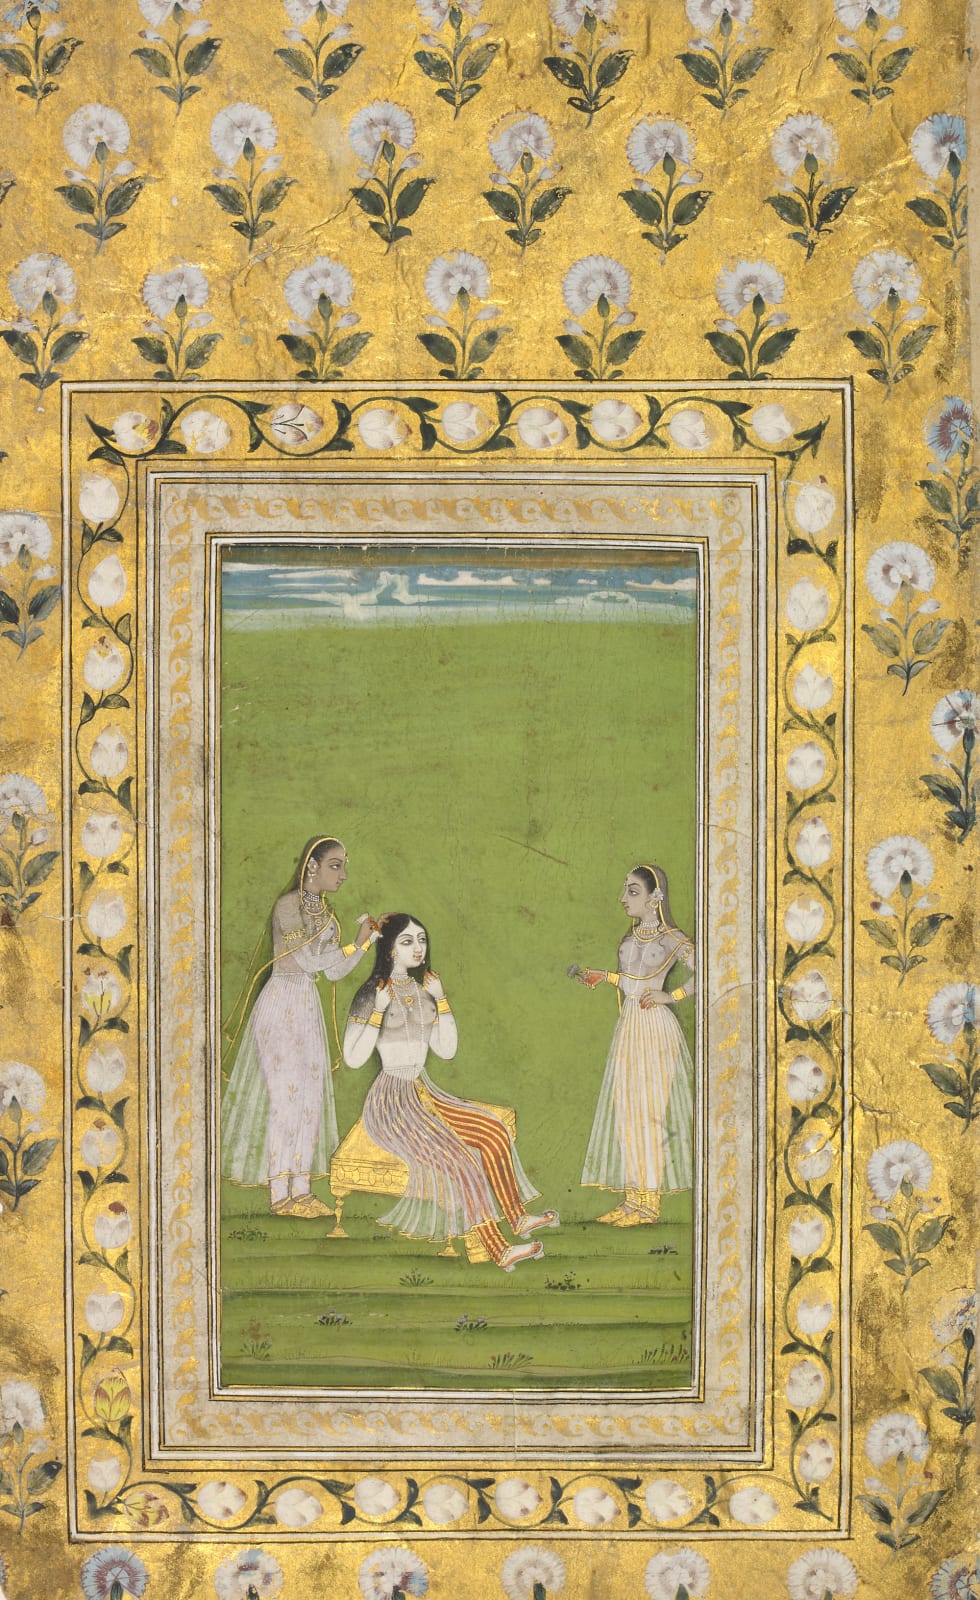 Lady seated at her toilette, Hyderabad, in the style of the Jaipur painter, 1720-50